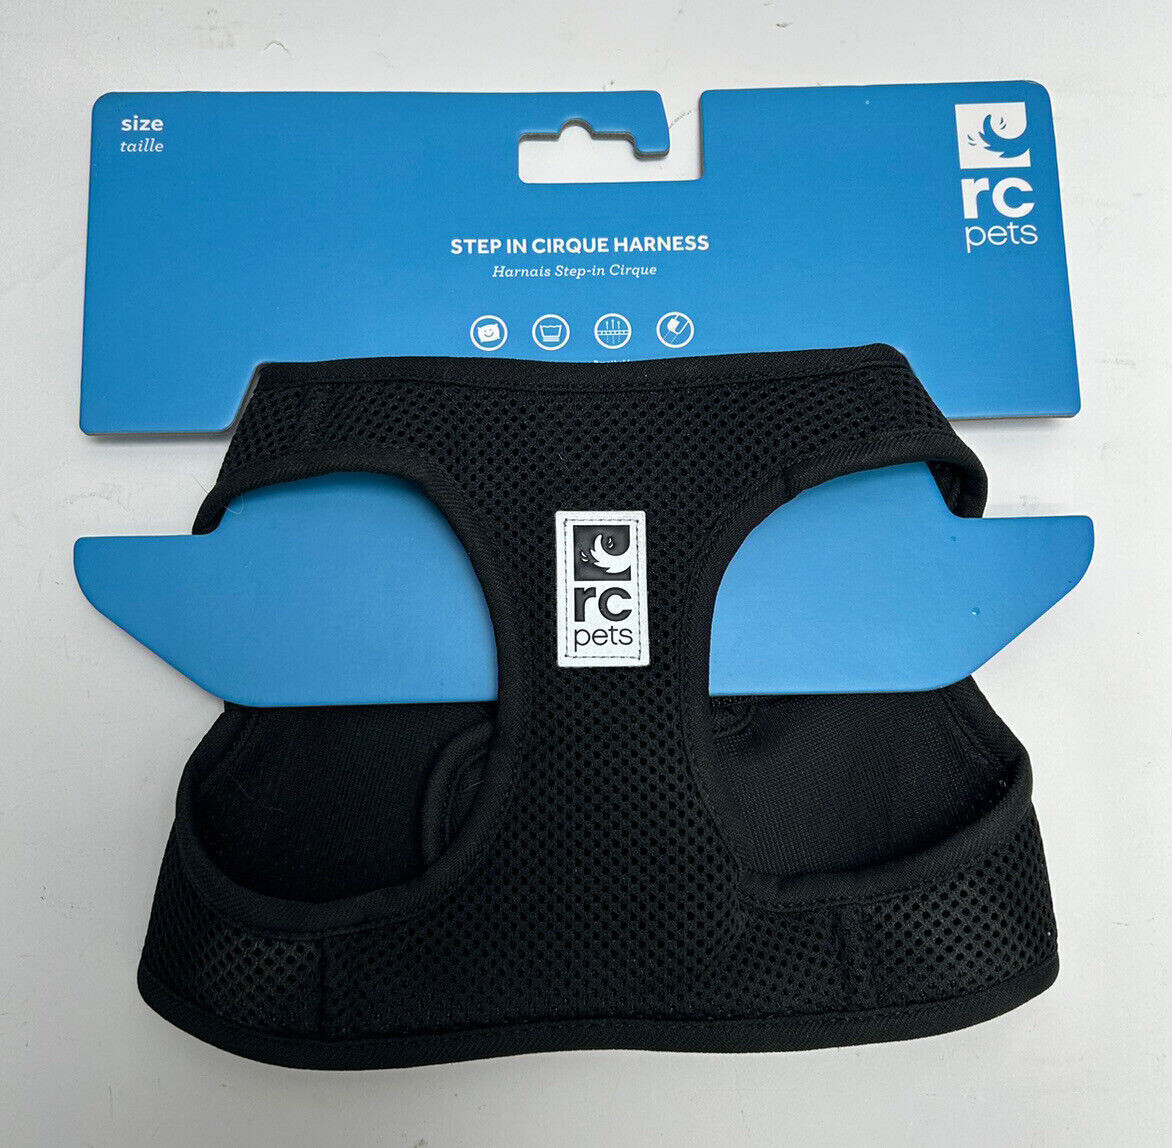 RCPets Cirque Harness Step-in Lg Black